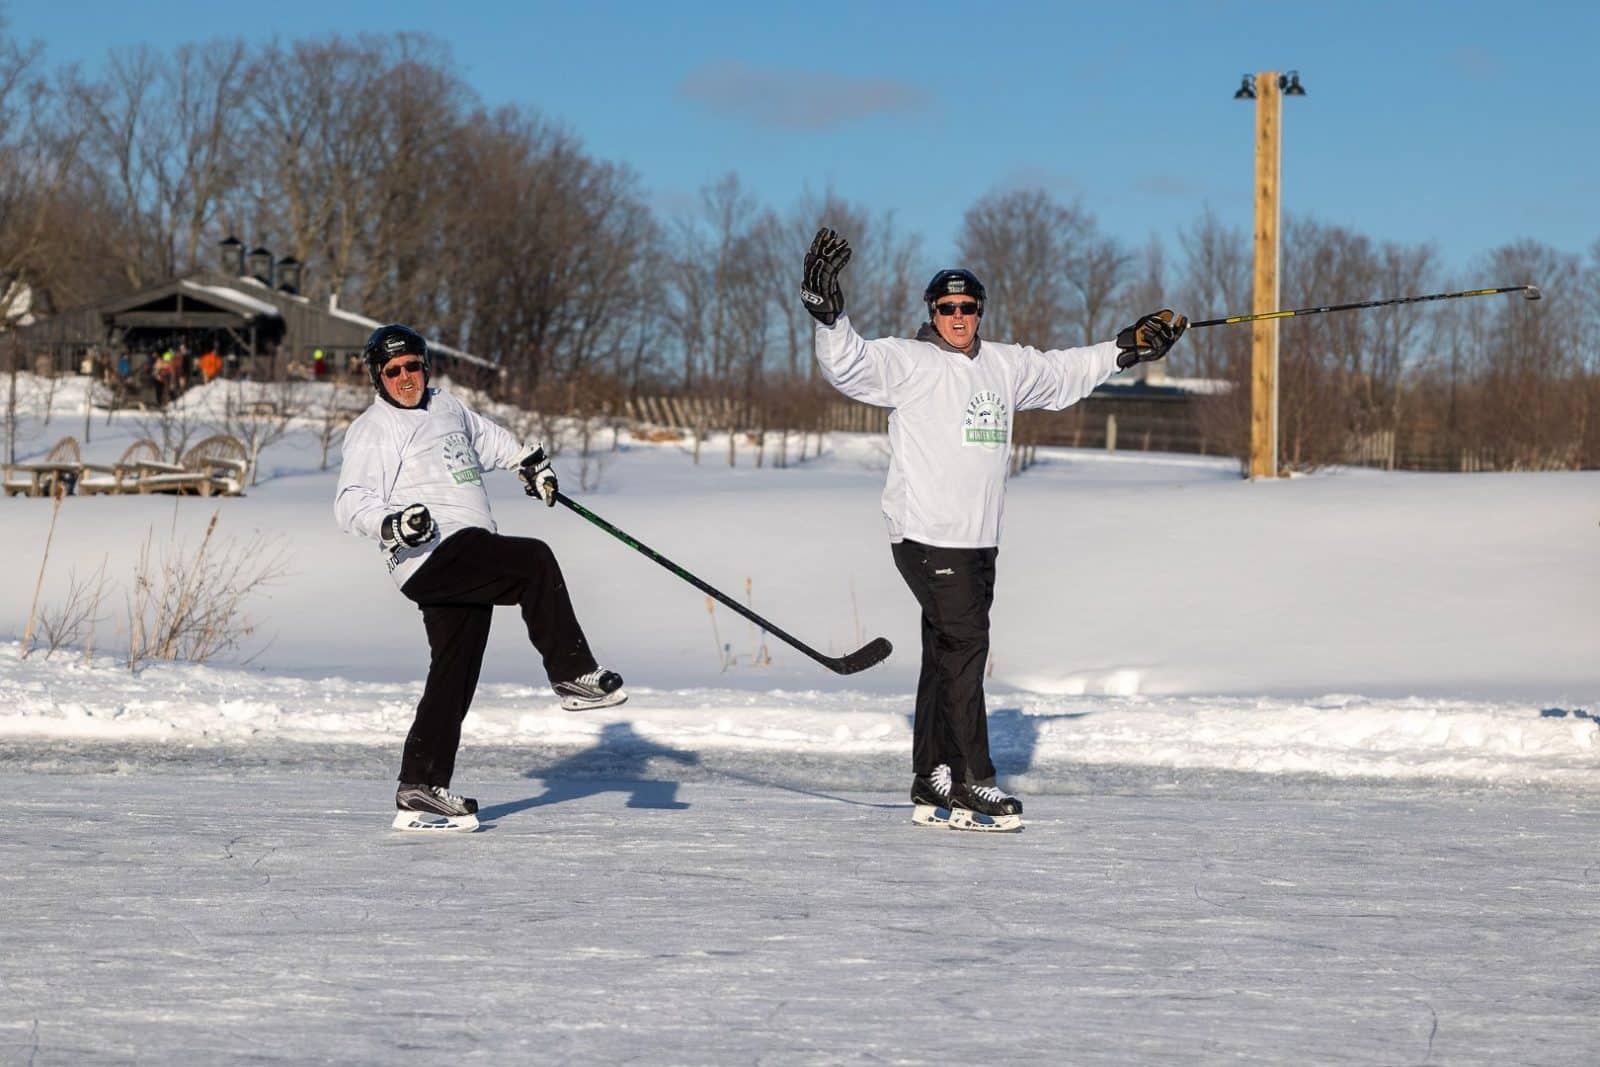 Ted Markle celebrates a goal at the Braestone Winter Classic pond hockey tournament with a fellow team member